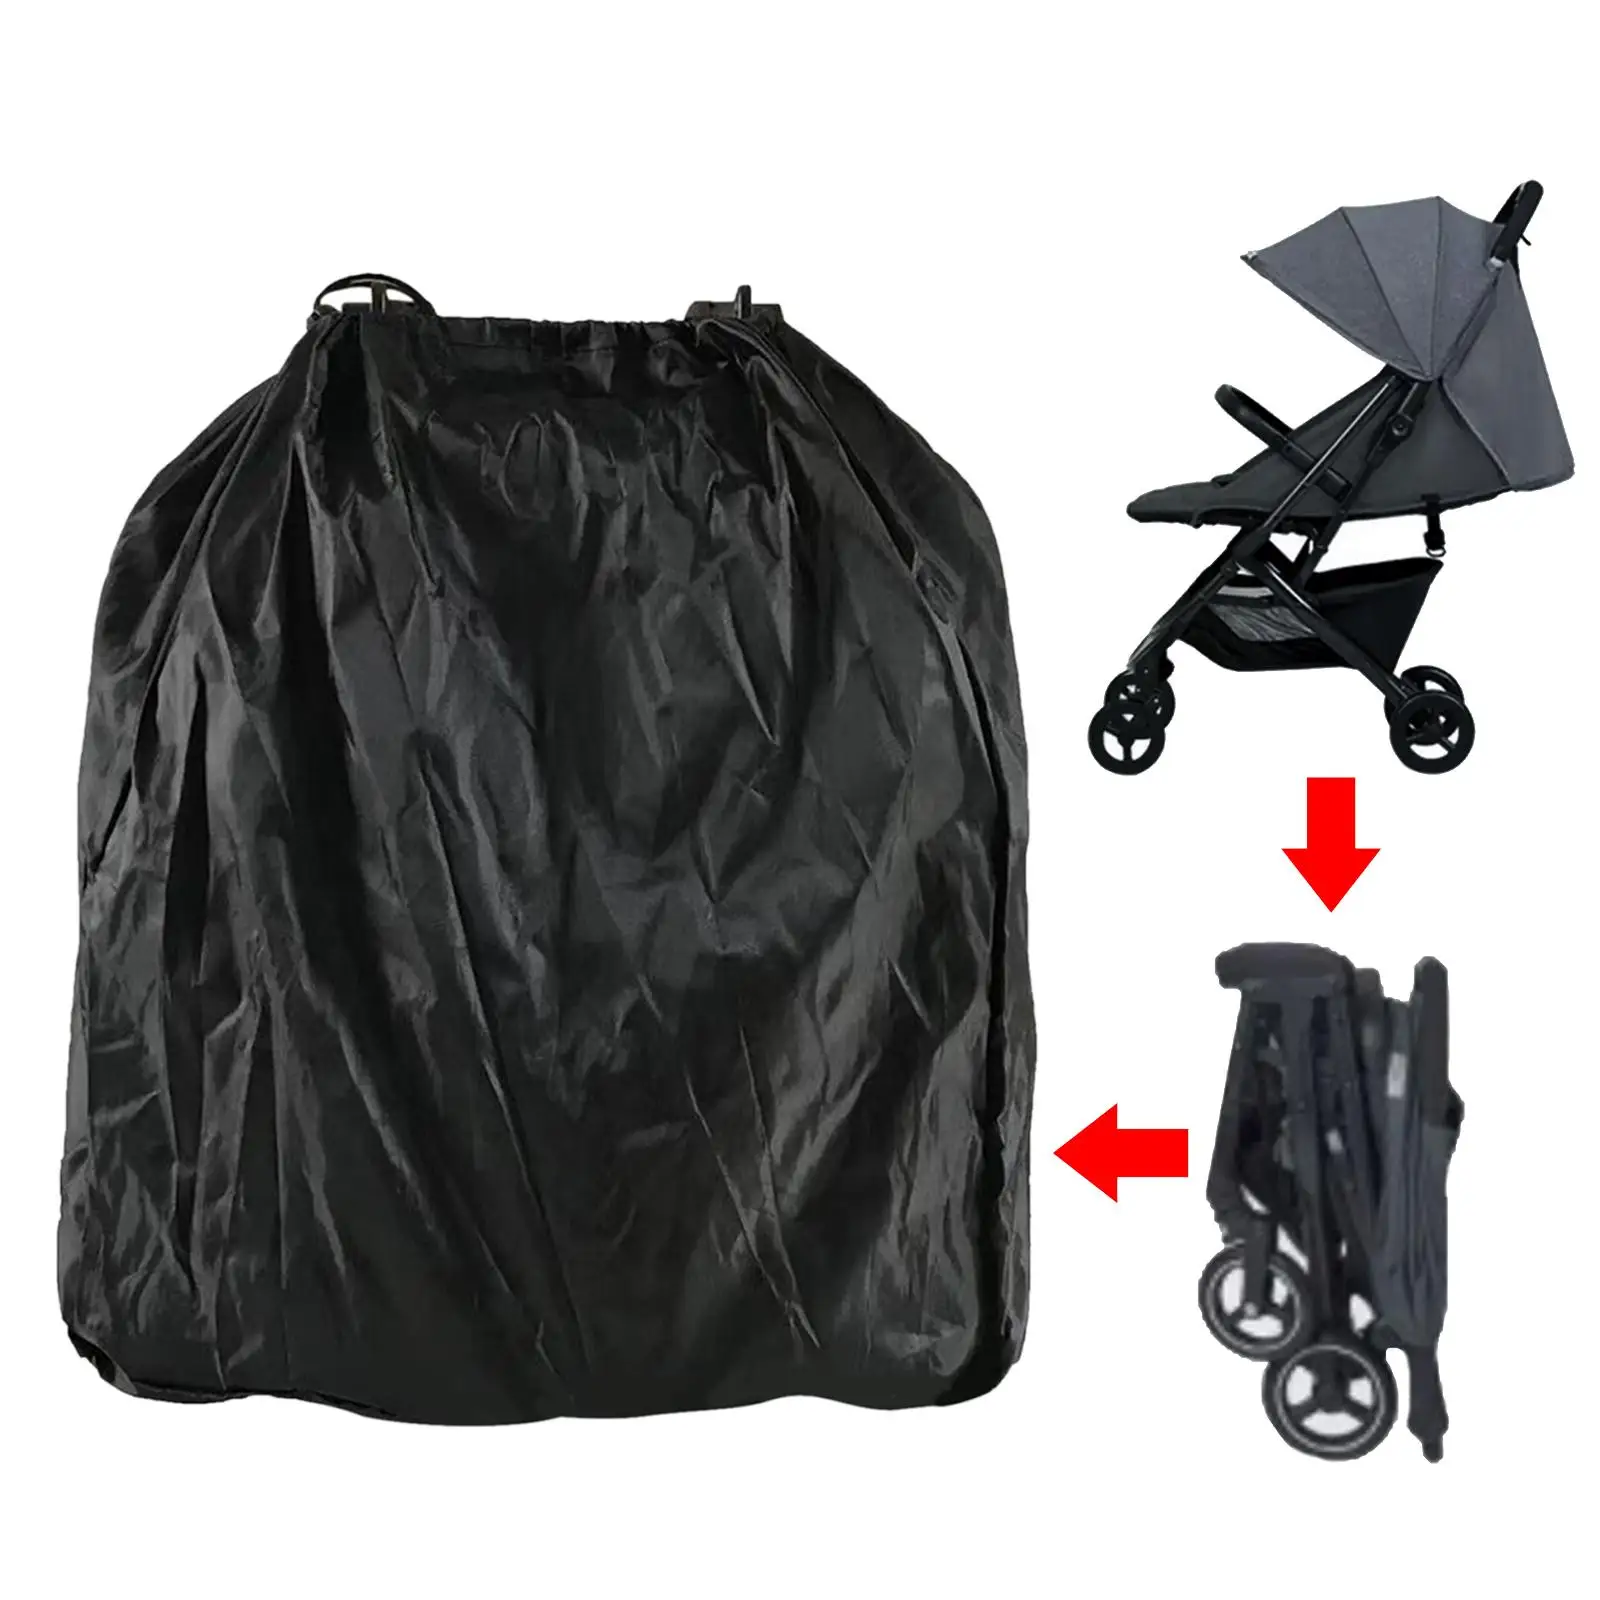 Air Travel Stroller Bag Sturdy Waterproof Dustproof Durable Umbrella Stroller Travel Bag Large for Gate Check Airports